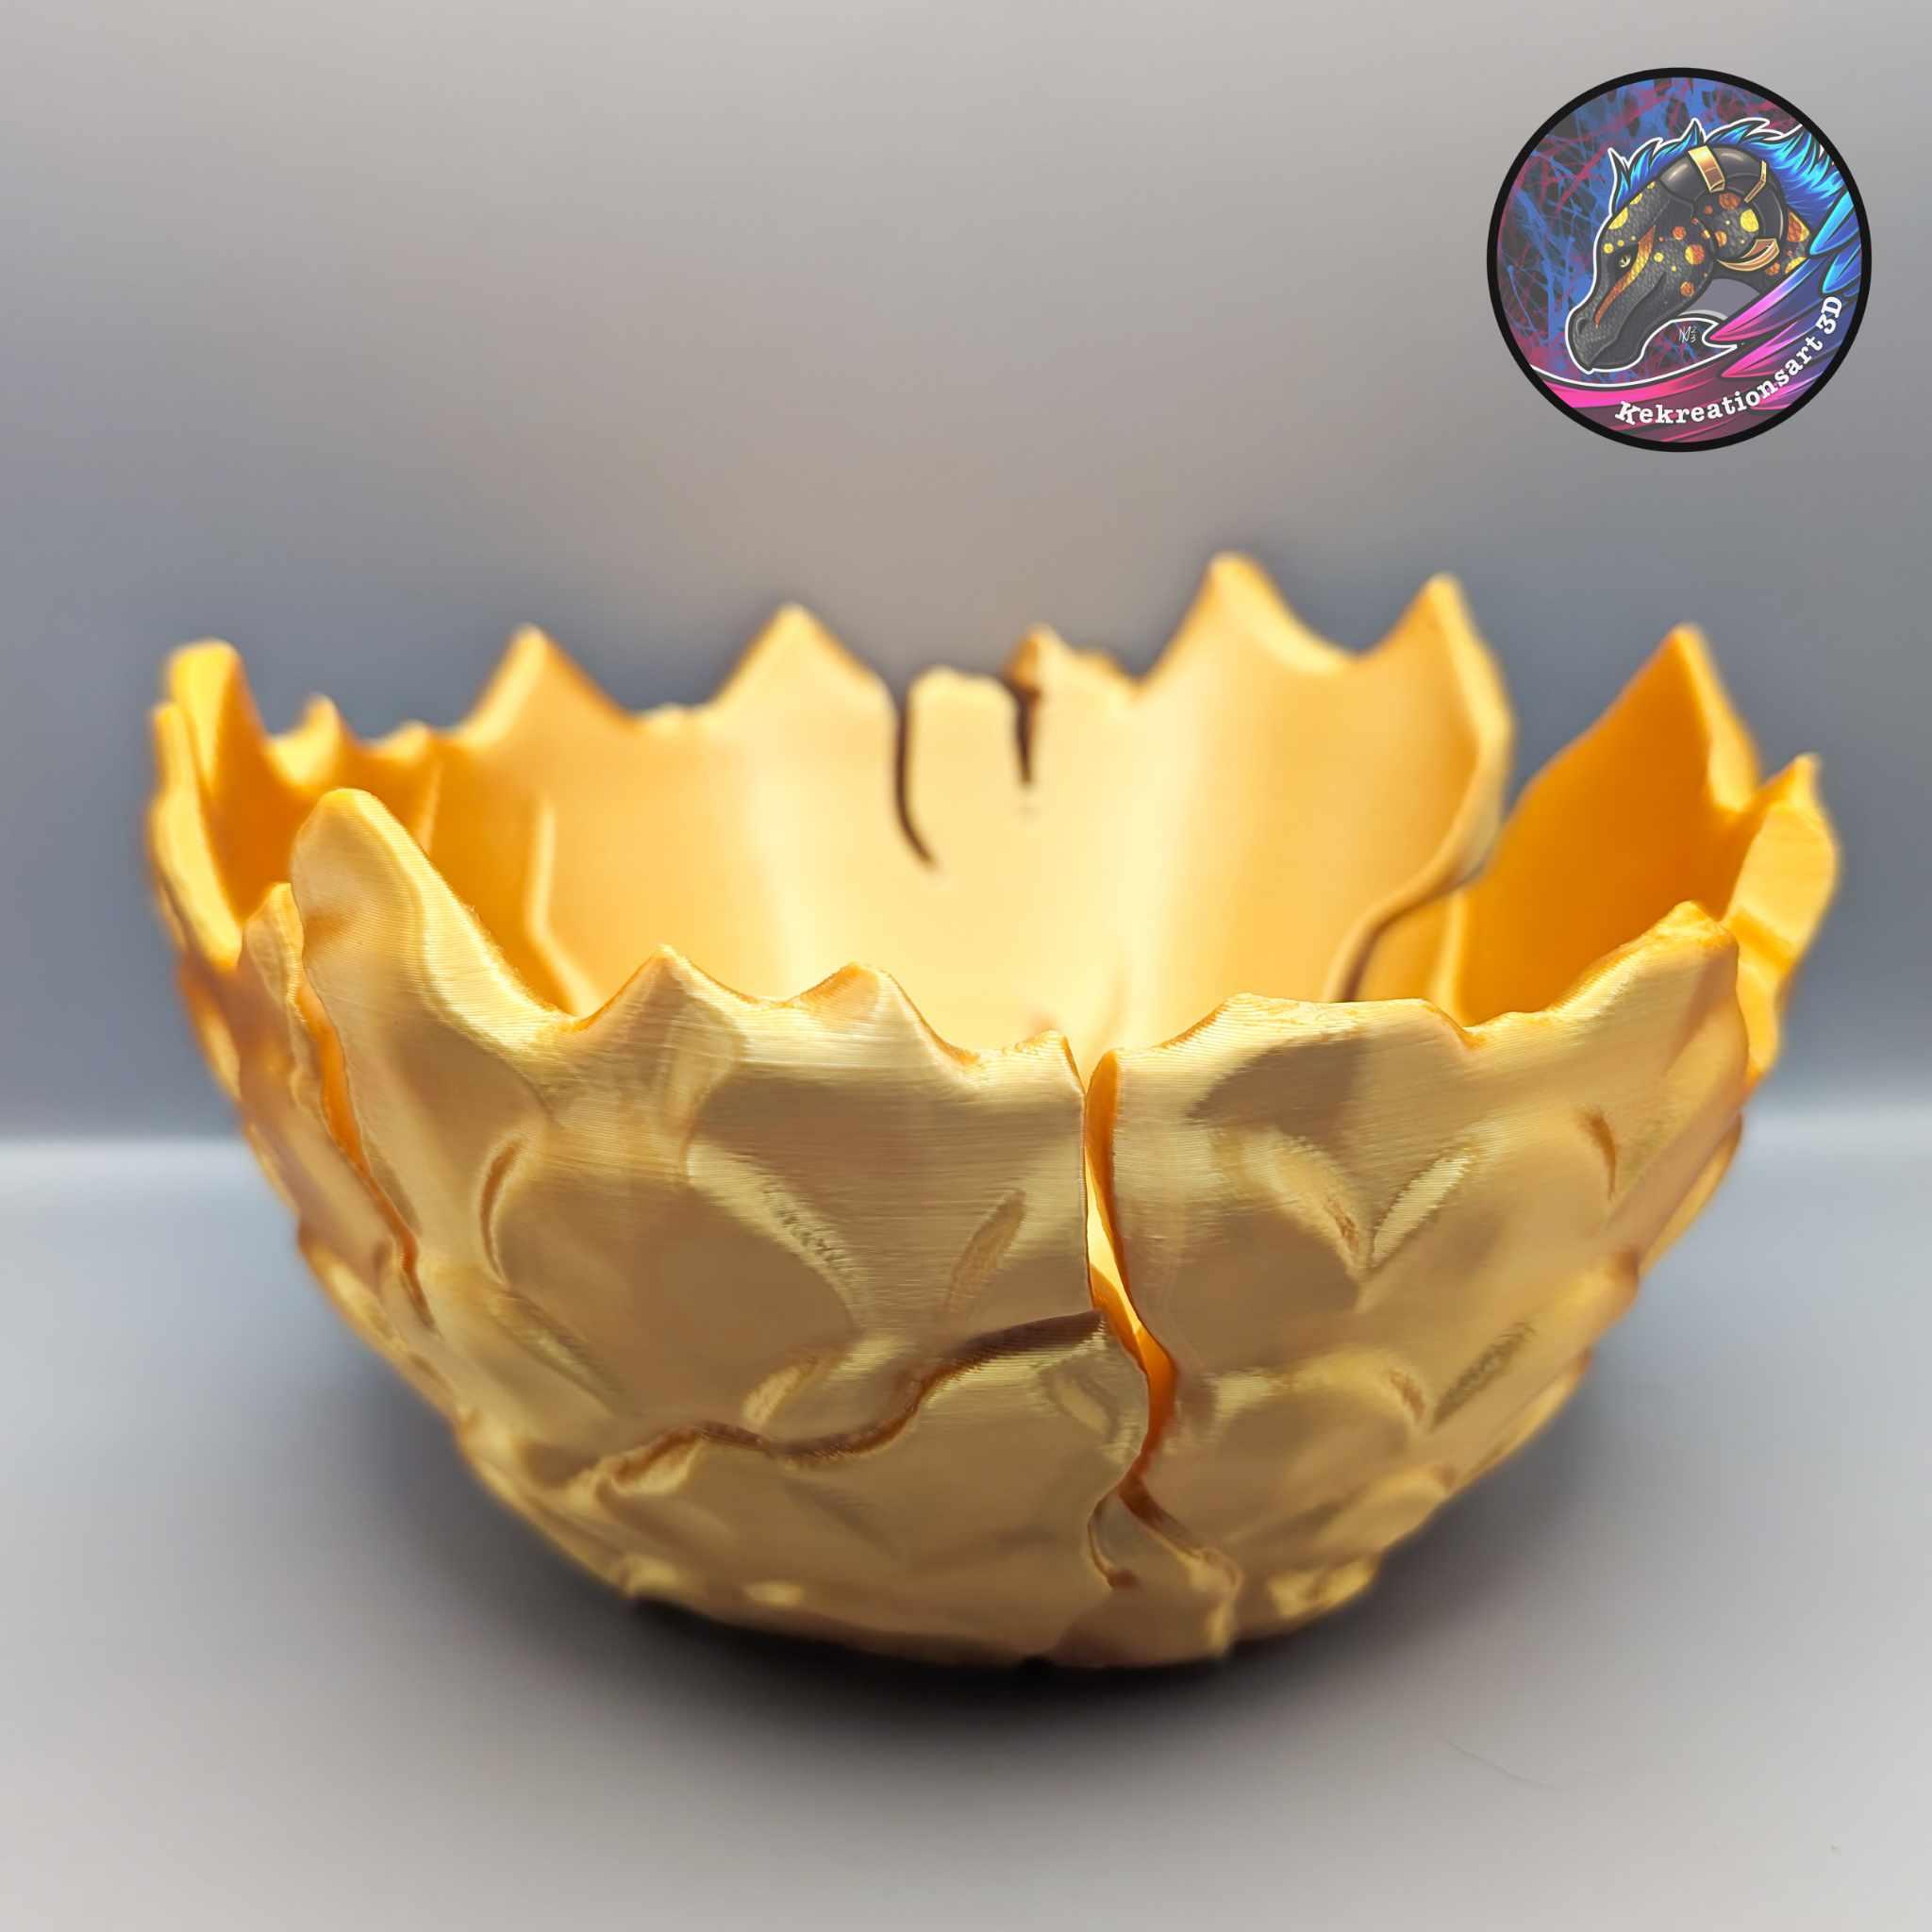 BOUTIQUE Cracked Dragon Egg Display Bowl EARLY ACCESS